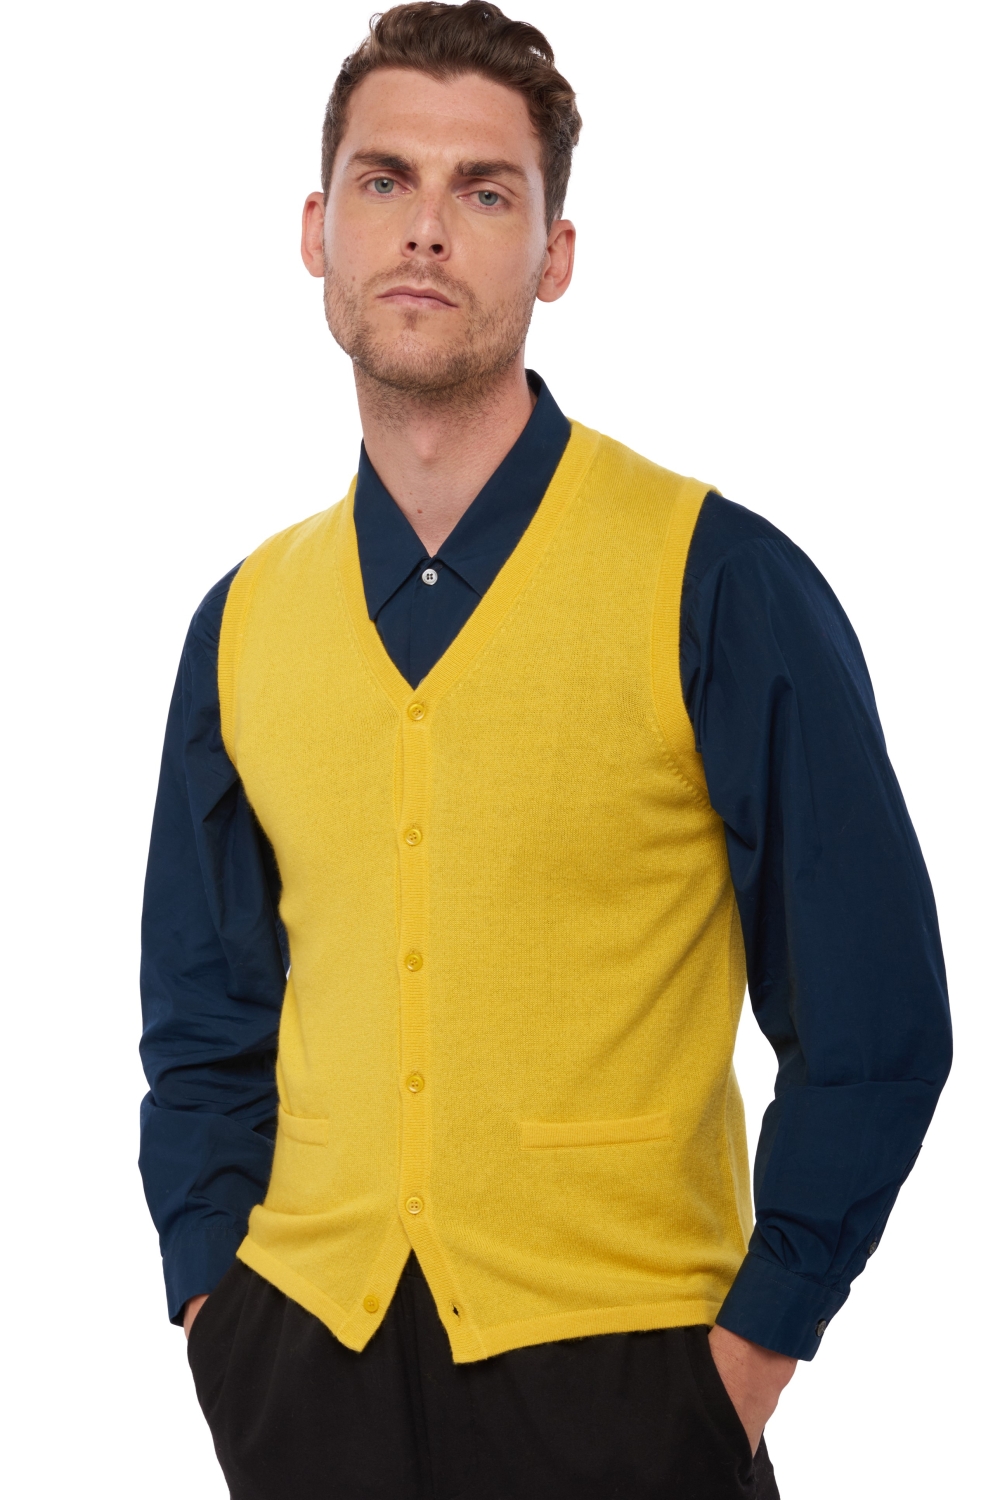 Cashmere men timeless classics basile cyber yellow s